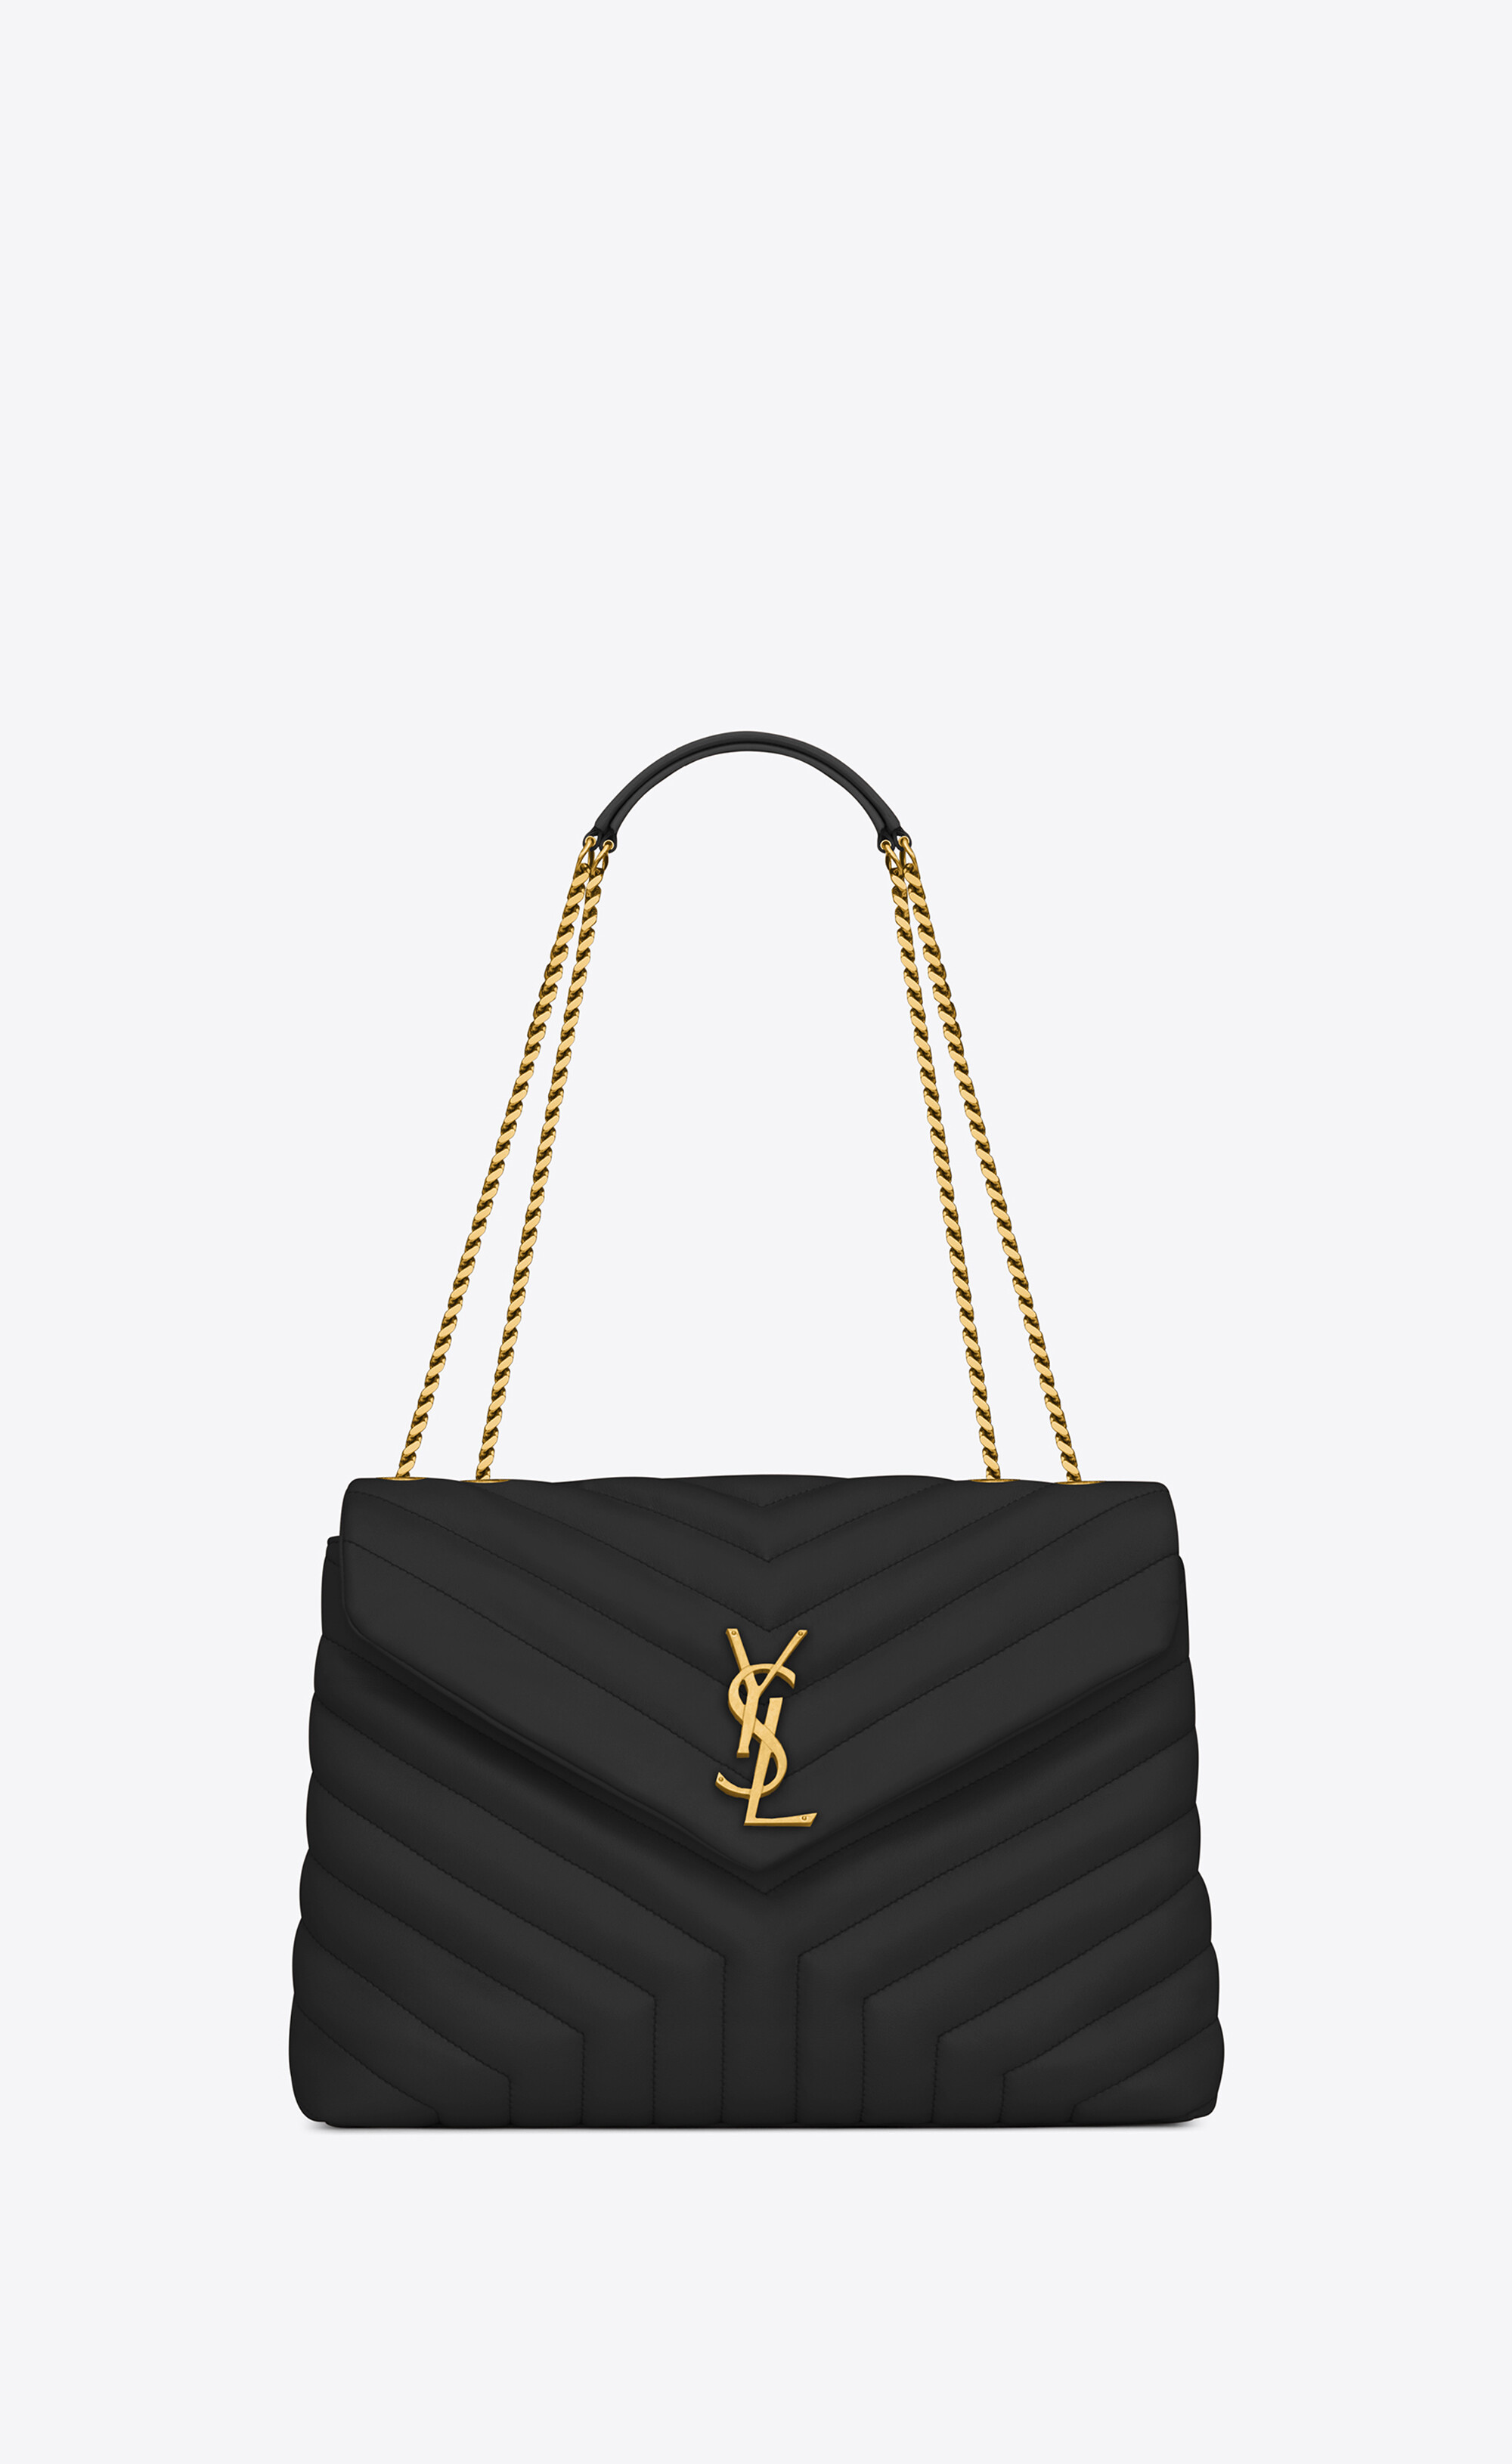 . hypothesis Wrinkles Buy Ysl Bag Britain, SAVE 40% - aveclumiere.com